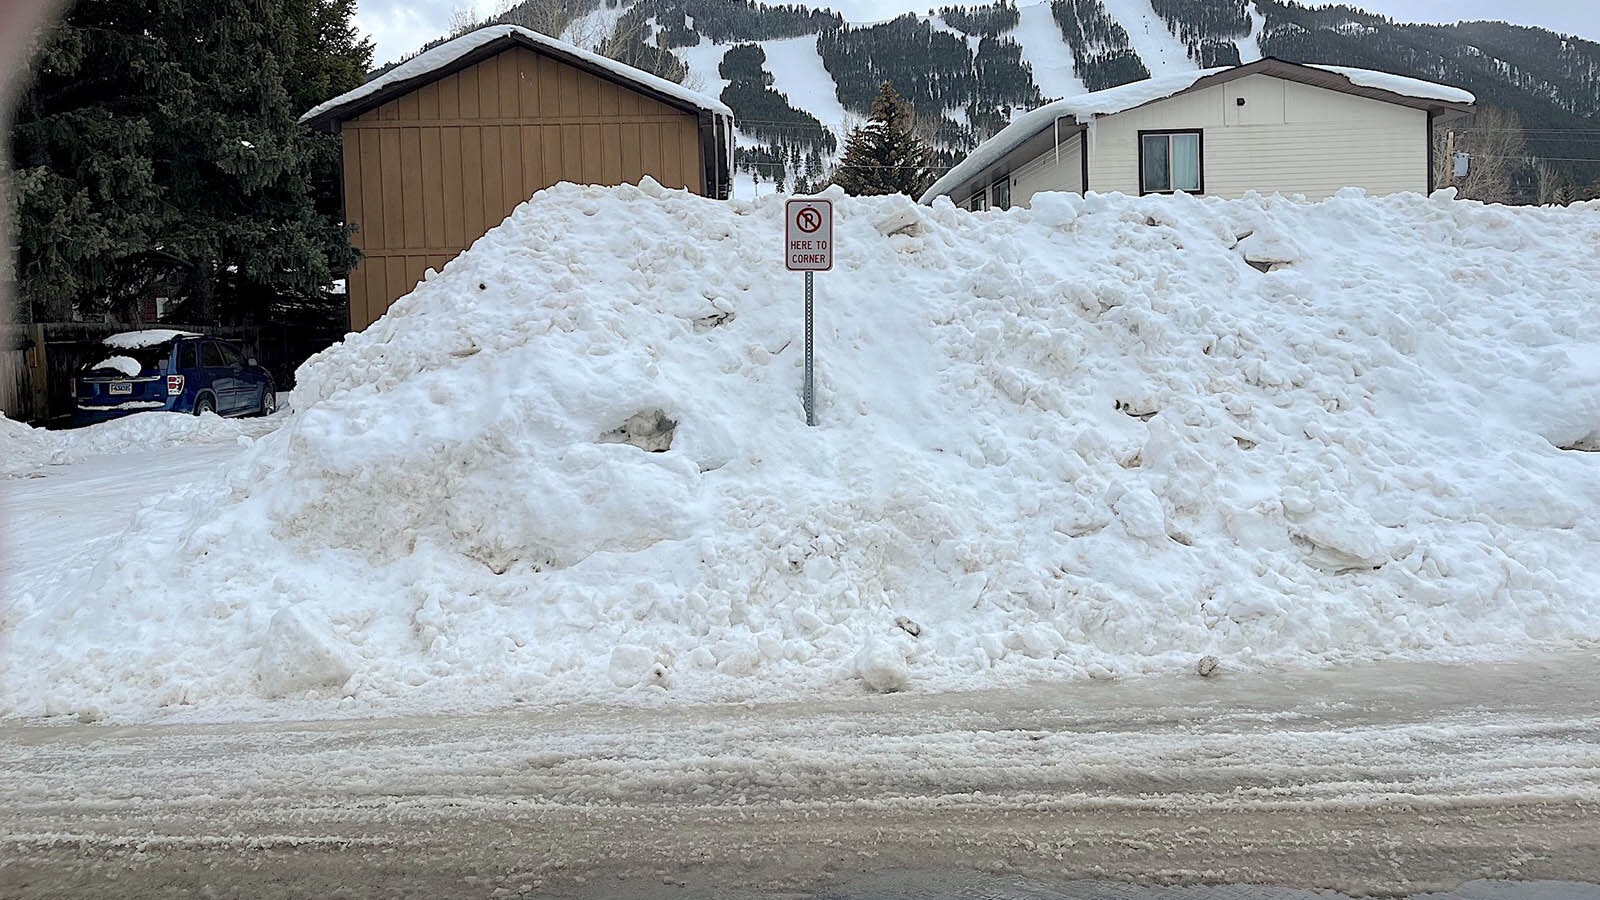 Snow piled up over the winter around Jackson Hole, Wyoming, as storms would dump on top of each other and cold temperatures kept melting at a minimum.